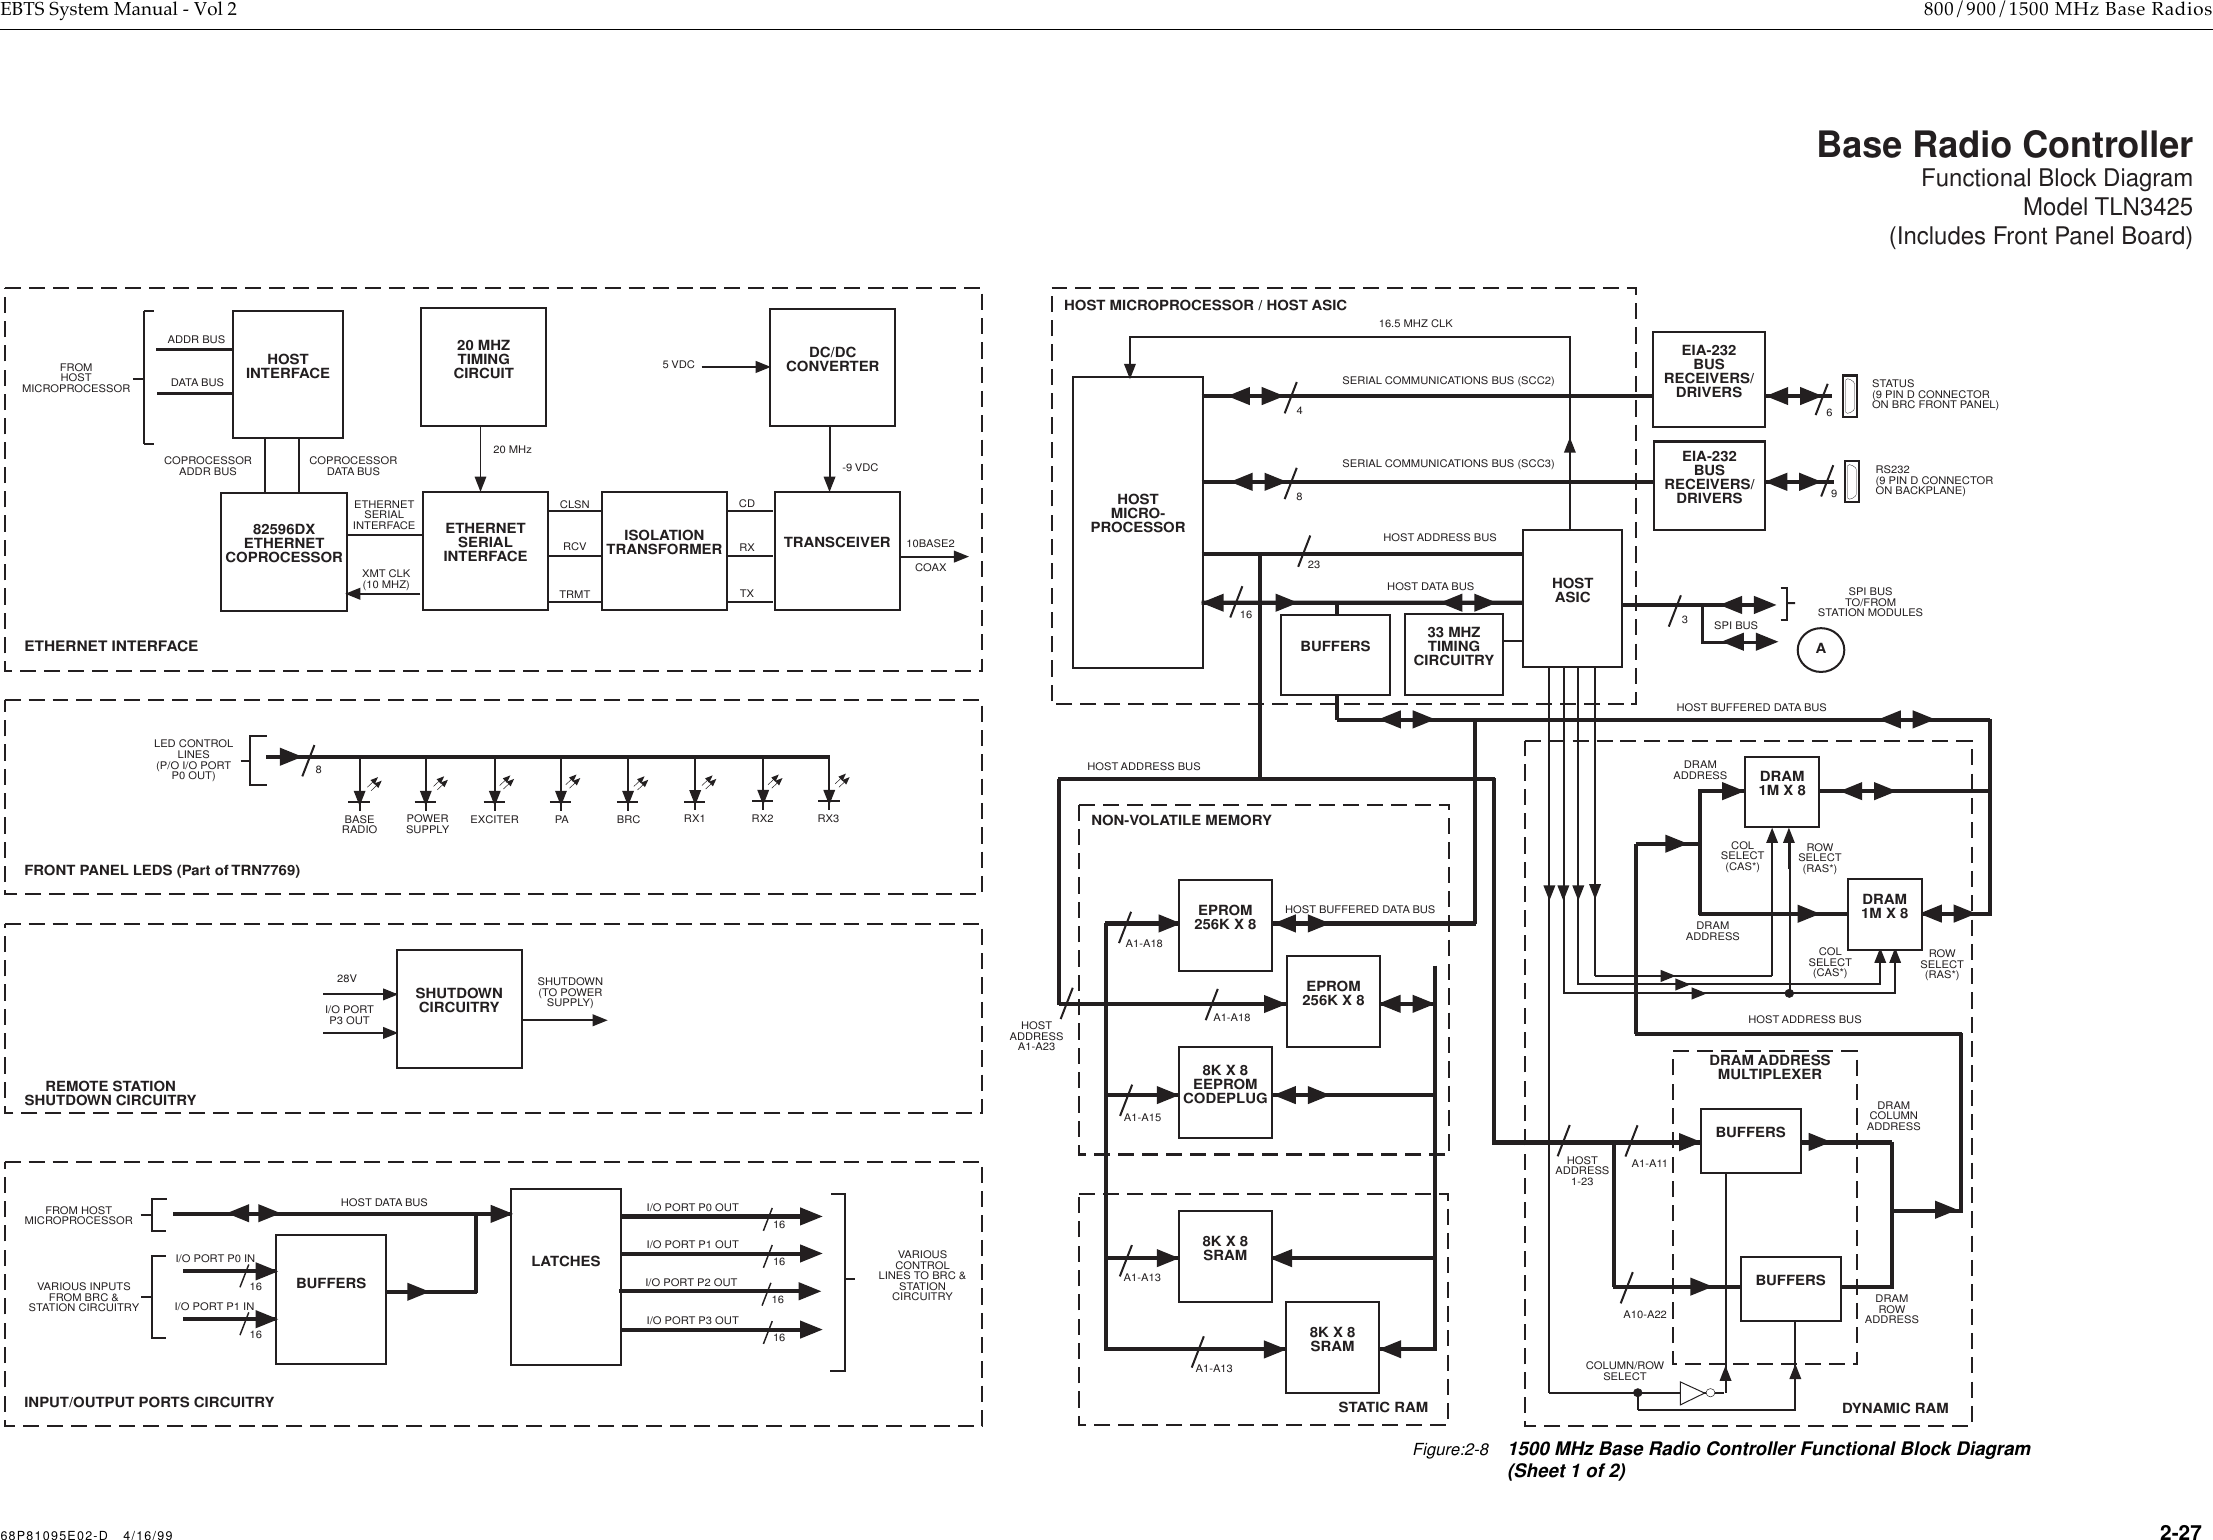  68P81095E02-D   4/16/99 2-27 EBTS System Manual - Vol 2 800/900/1500 MHz Base Radios  Base Radio ControllerFunctional Block DiagramModel TLN3425(Includes Front Panel Board)HOSTADDRESSA1-A23SERIAL COMMUNICATIONS BUS (SCC3)SERIAL COMMUNICATIONS BUS (SCC2)HOST BUFFERED DATA BUSHOST ADDRESS BUSHOST BUFFERED DATA BUSHOST ADDRESS BUSHOST DATA BUSDRAM ADDRESSMULTIPLEXERCOLUMN/ROWSELECTDRAMCOLUMNADDRESSDRAMROWADDRESSROWSELECT(RAS*)COLSELECT(CAS*)COLSELECT(CAS*)ROWSELECT(RAS*)DRAMADDRESSDRAMADDRESSHOSTASIC33 MHZTIMINGCIRCUITRYBUFFERSEPROM256K X 88K X 8EEPROMCODEPLUG8K X 8SRAM8K X 8SRAMA1-A11A10-A22A1-A18A1-A18A1-A1548EIA-232BUSRECEIVERS/DRIVERS69EPROM256K X 8SPI BUSSPI BUSTO/FROMSTATION MODULES3HOST ADDRESS BUSNON-VOLATILE MEMORYHOSTMICRO-PROCESSORHOST MICROPROCESSOR / HOST ASICDRAM1M X 8DRAM1M X 8HOSTADDRESS1-23EIA-232BUSRECEIVERS/DRIVERSDYNAMIC RAMVARIOUS INPUTSFROM BRC &amp;STATION CIRCUITRYINPUT/OUTPUT PORTS CIRCUITRYI/O PORT P0 INHOST DATA BUS I/O PORT P0 OUTI/O PORT P1 OUTI/O PORT P2 OUTI/O PORT P3 OUTVARIOUSCONTROLLINES TO BRC &amp;STATIONCIRCUITRYFROM HOSTMICROPROCESSORI/O PORT P1 INLATCHESBUFFERS161616161616REMOTE STATIONSHUTDOWN CIRCUITRYSHUTDOWN(TO POWERSUPPLY)28VI/O PORTP3 OUTFRONT PANEL LEDS (Part of TRN7769)LED CONTROLLINES(P/O I/O PORTP0 OUT)BASERADIO POWERSUPPLY EXCITER PA BRC RX1 RX2 RX38ETHERNET INTERFACECDRXTXCLSNRCVTRMTFROMHOSTMICROPROCESSORADDR BUSDATA BUSCOPROCESSORADDR BUS COPROCESSORDATA BUS10BASE2COAXETHERNETSERIALINTERFACE82596DXETHERNETCOPROCESSORETHERNETSERIALINTERFACE TRANSCEIVERAHOSTINTERFACEISOLATIONTRANSFORMERSHUTDOWNCIRCUITRYBUFFERSBUFFERS16.5 MHZ CLKDC/DCCONVERTER5 VDC-9 VDC231620 MHZTIMINGCIRCUIT20 MHzXMT CLK(10 MHZ)A1-A13A1-A13STATUS(9 PIN D CONNECTORON BRC FRONT PANEL)RS232(9 PIN D CONNECTORON BACKPLANE)STATIC RAMFigure:2-81500 MHz Base Radio Controller Functional Block Diagram (Sheet 1 of 2)